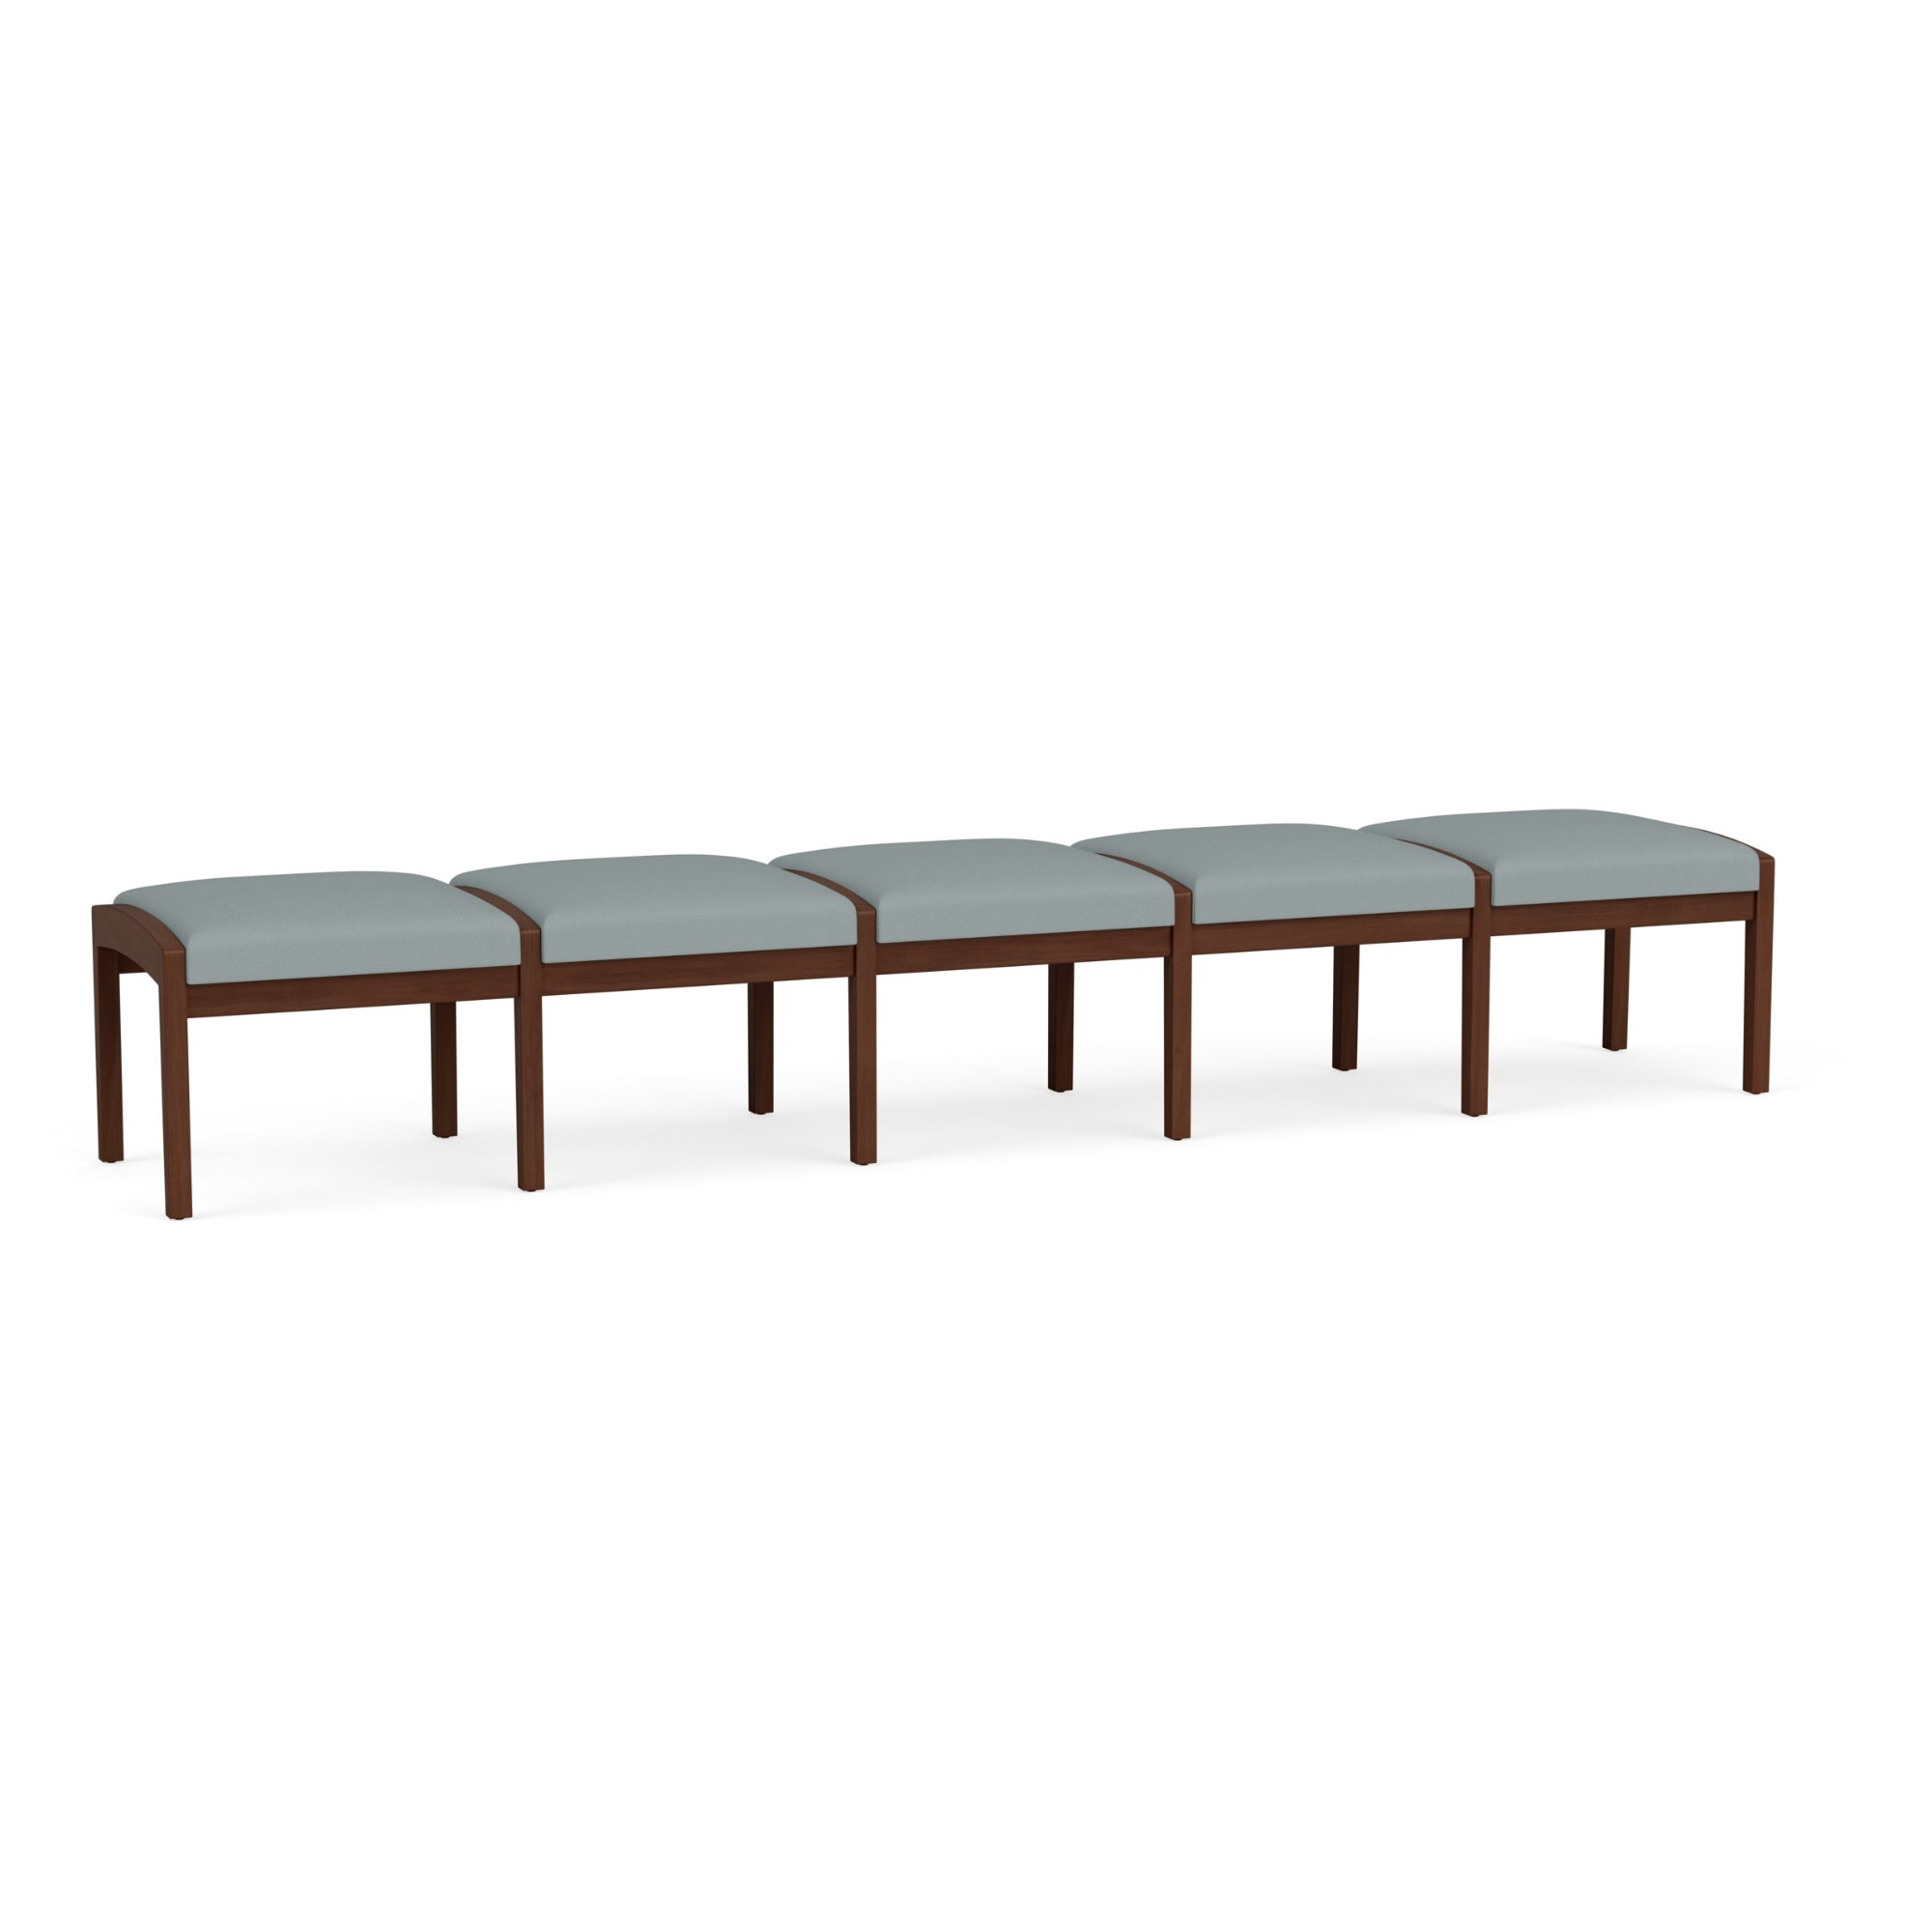 Lenox Wood Collection Reception Seating, 5 Seat Bench, Standard Vinyl Upholstery, FREE SHIPPING